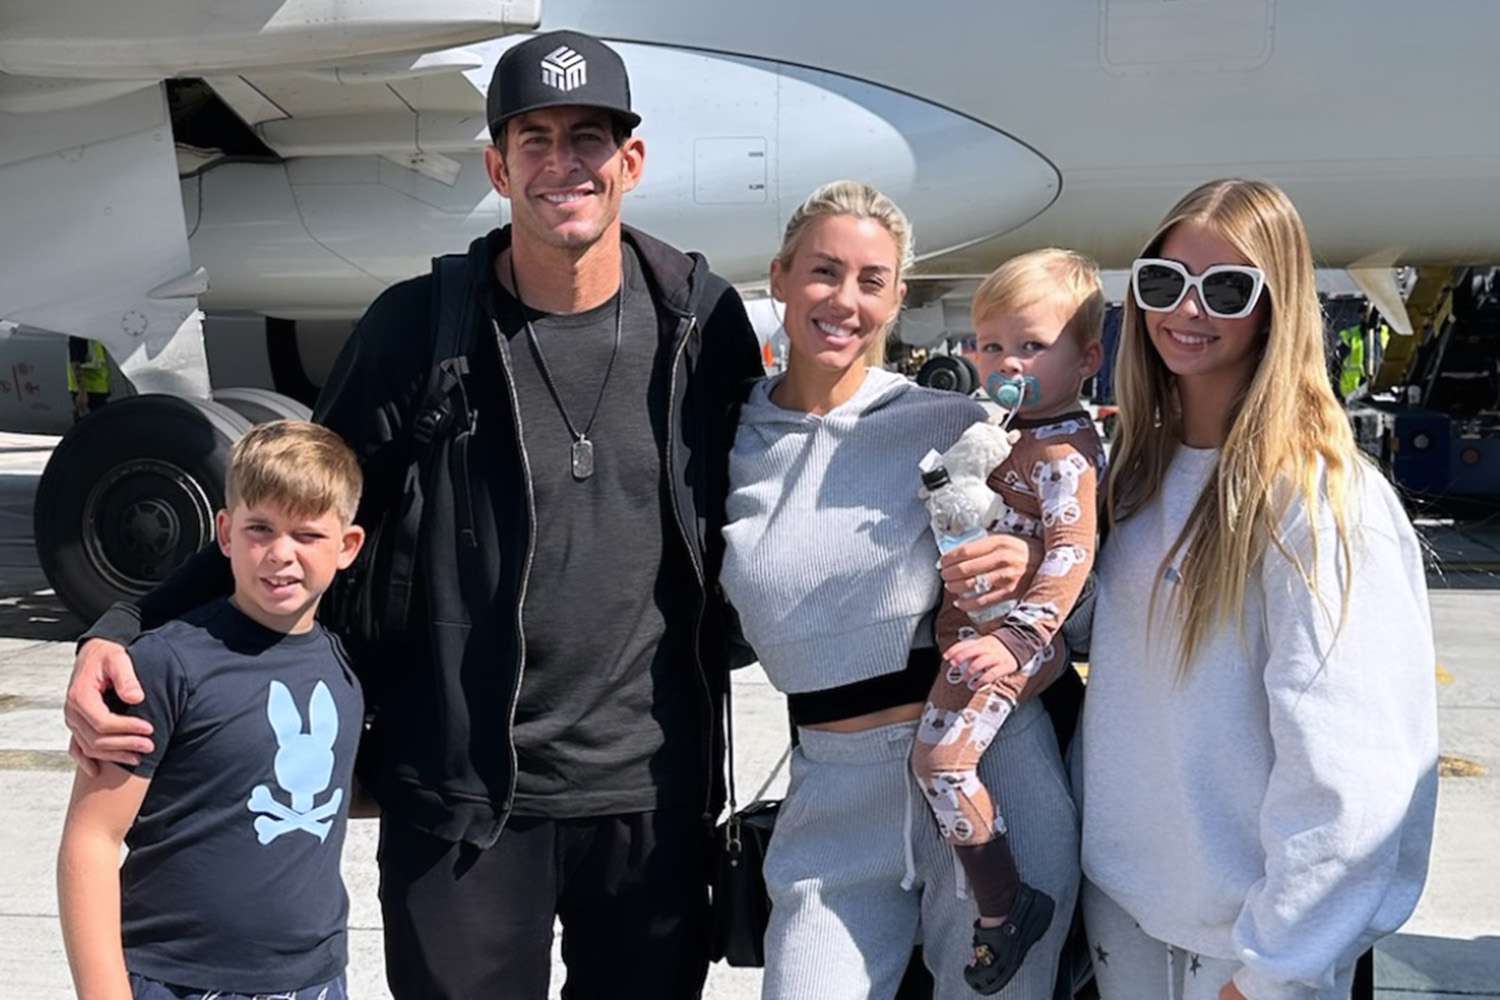 Heather Rae El Moussa and Tarek El Moussa Jet Off to Caribbean with All 3 Kids for Family Vacation